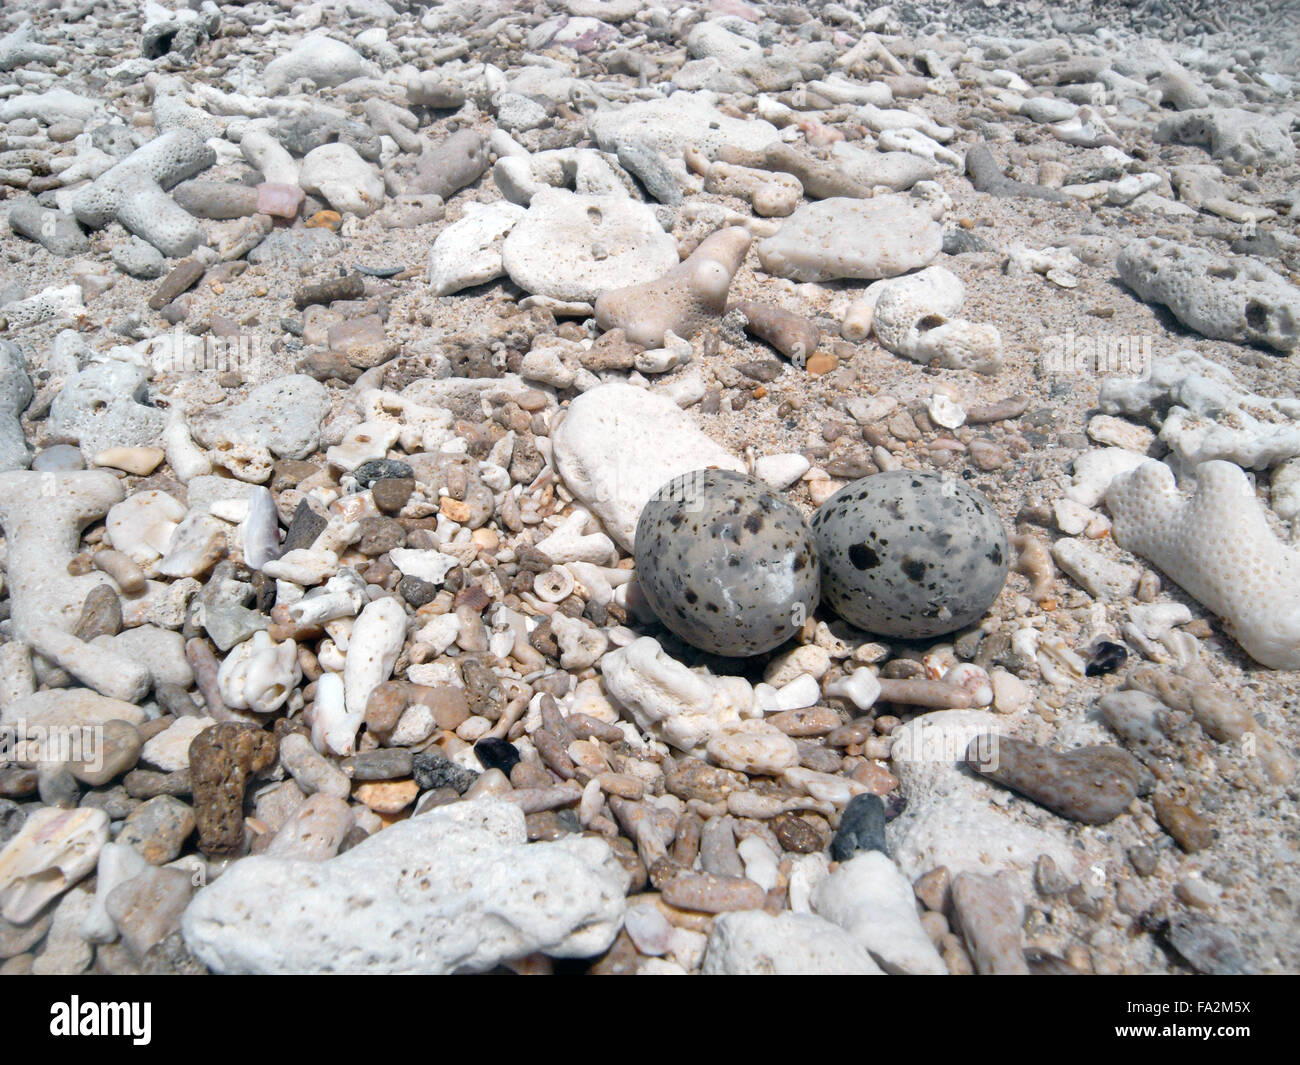 Little Tern (Sternula albifrons) eggs on coral rubble beach, Coombe Island, Family Islands National Park, Great Barrier Reef Stock Photo